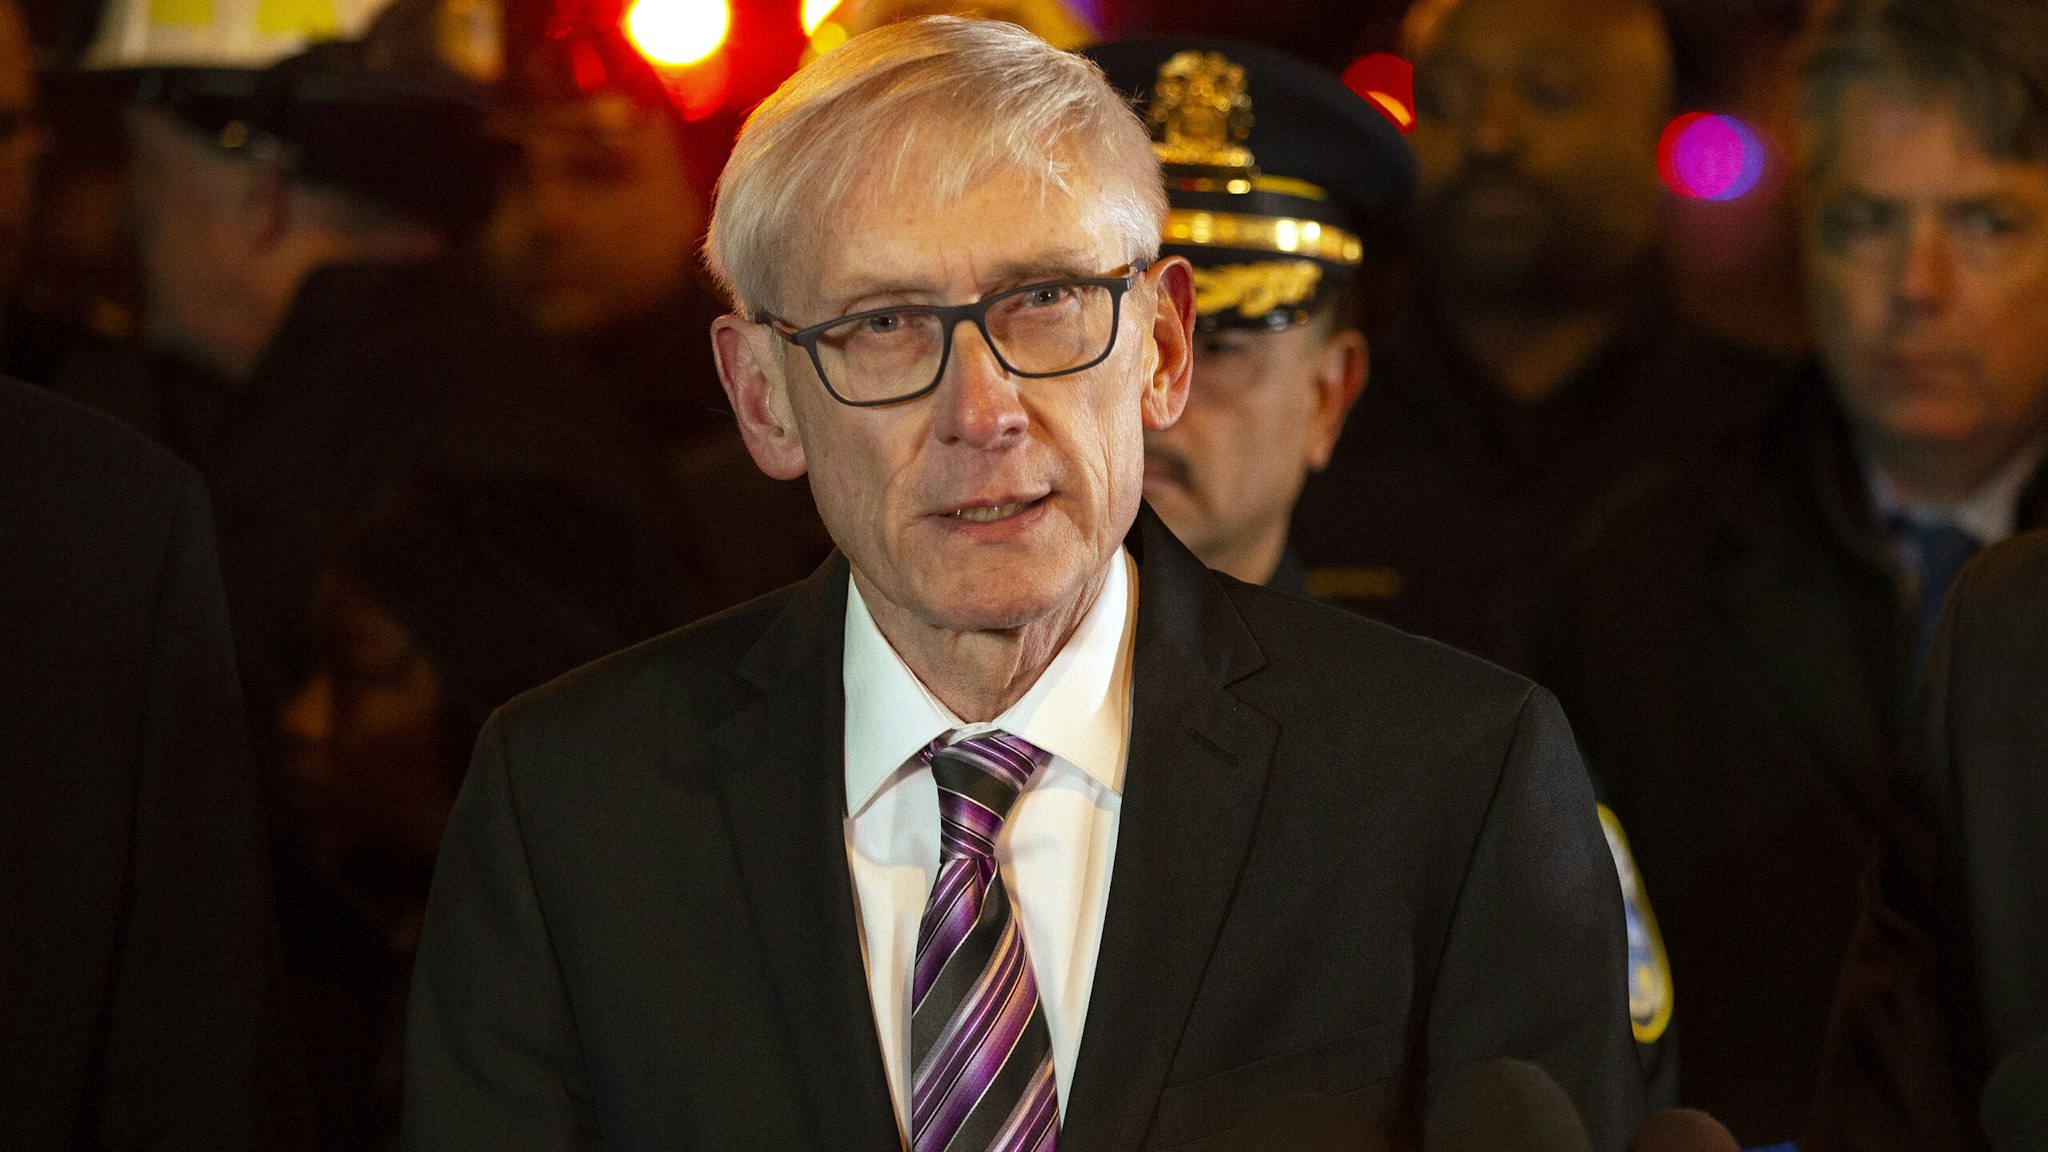 MILWAUKEE, WISCONSIN - FEBRUARY 26: Wisconsin Governor Tony Evers speaks to the media following a shooting at the Molson Coors Brewing Co. campus on February 26, 2020 in Milwaukee, Wisconsin. Six people, including the gunman, were reportedly killed when an ex-employee opened fire at the MillerCoors building on Wednesday.